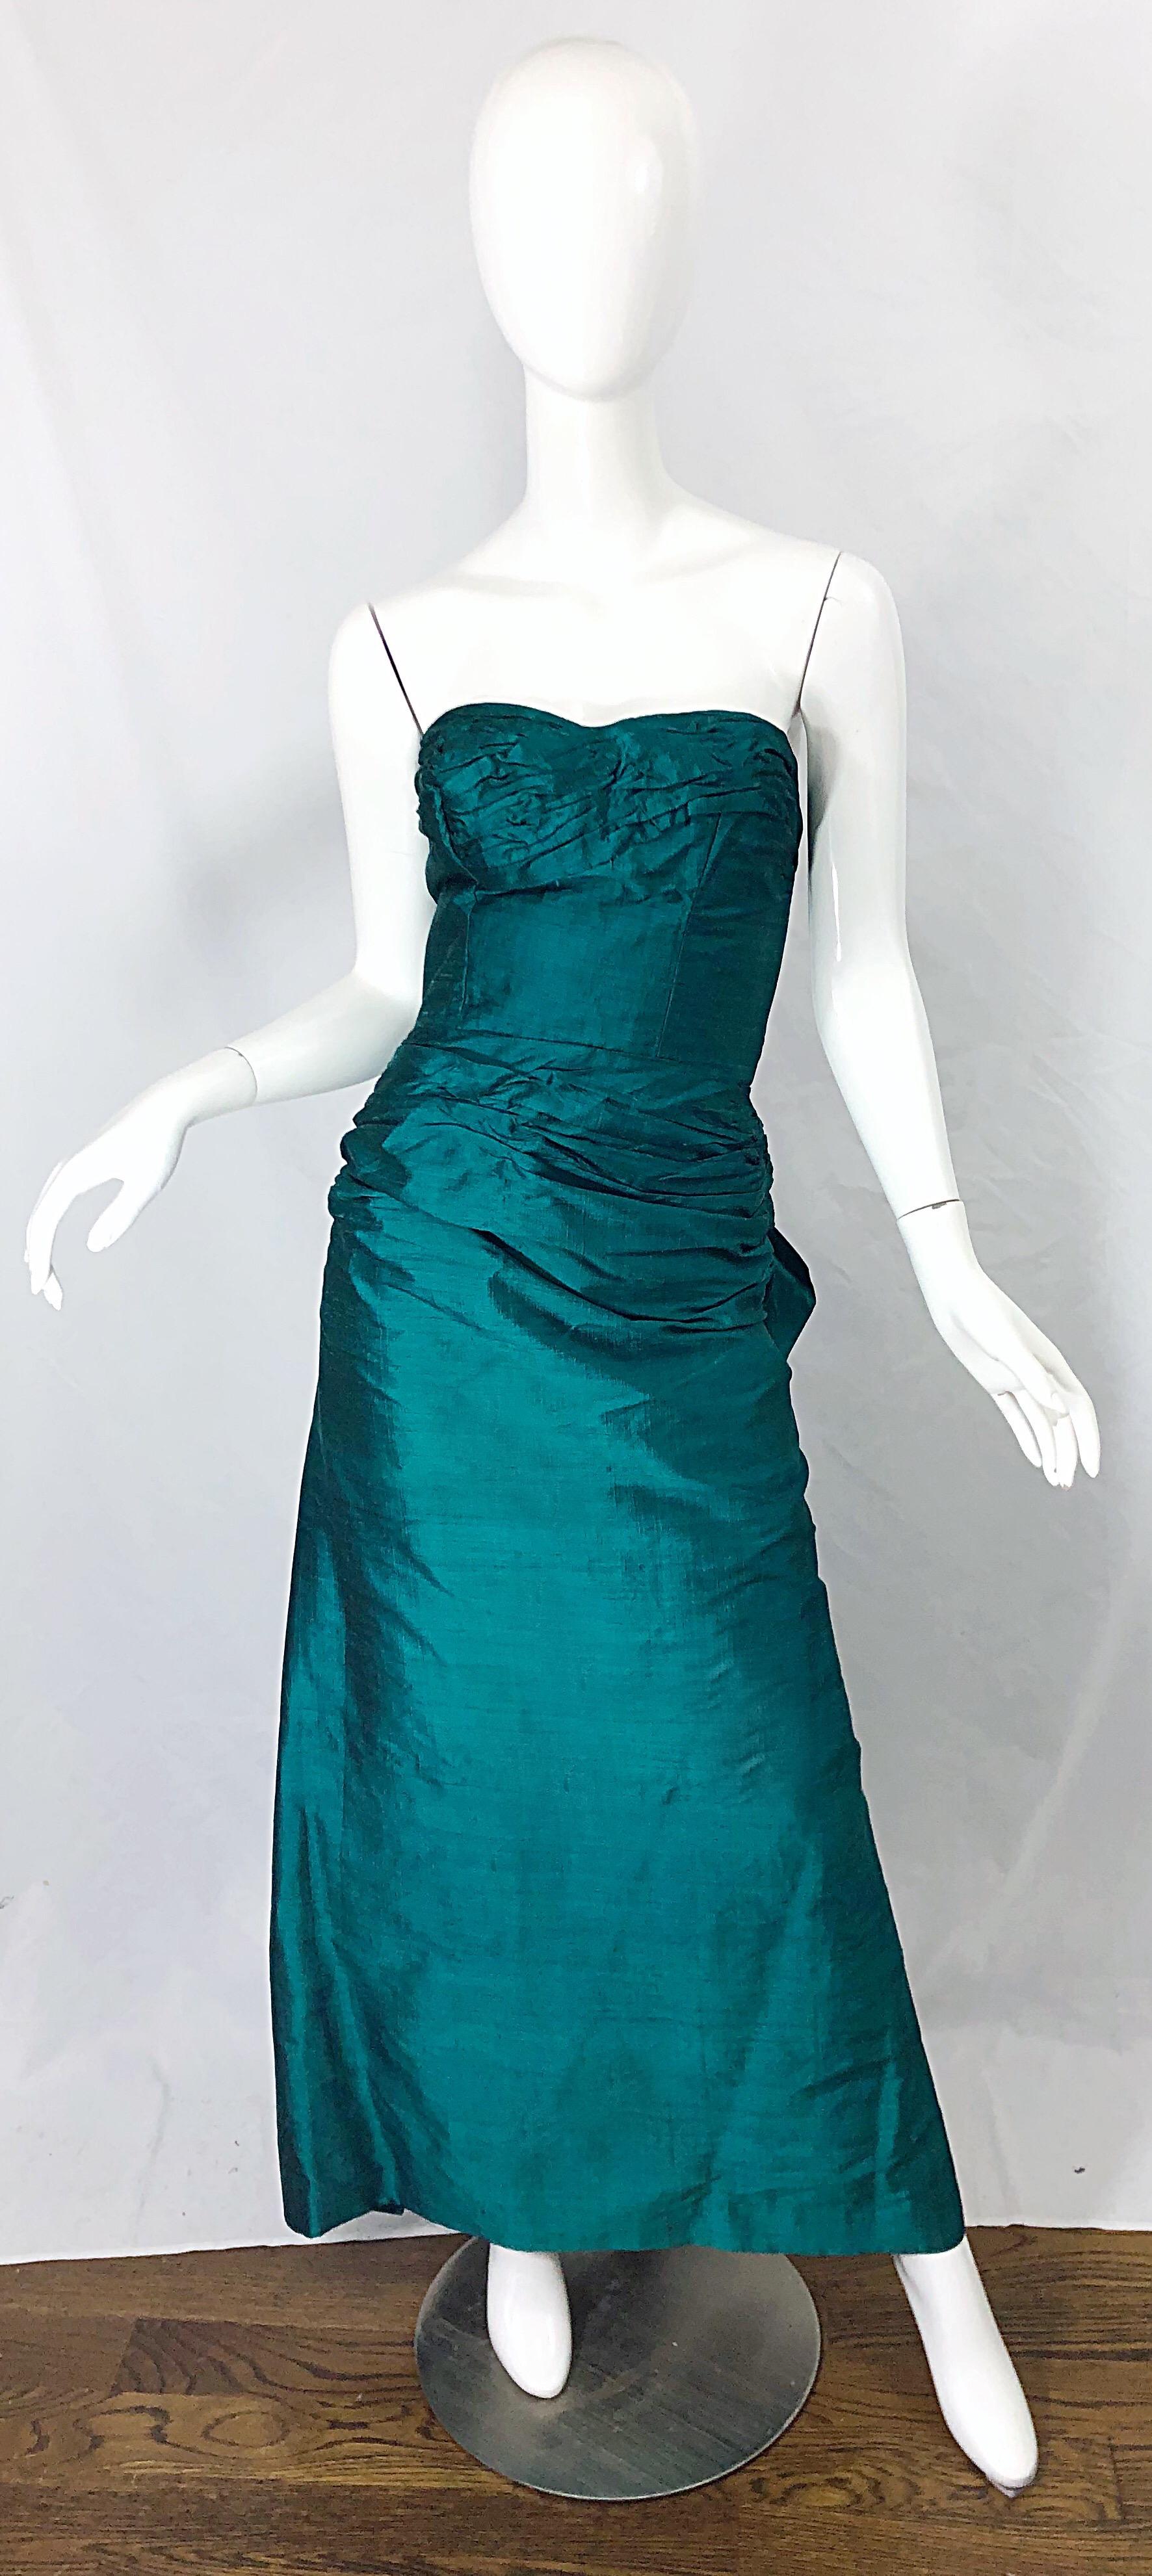 Bombshell 1950s emerald green silk shantung full length dress! Fabulous flattering wiggle fit, with couture qualities. Flattering ruching detail at the waist. Avant Garde oversized half bow detail on the back. Full metal zipper up the side with